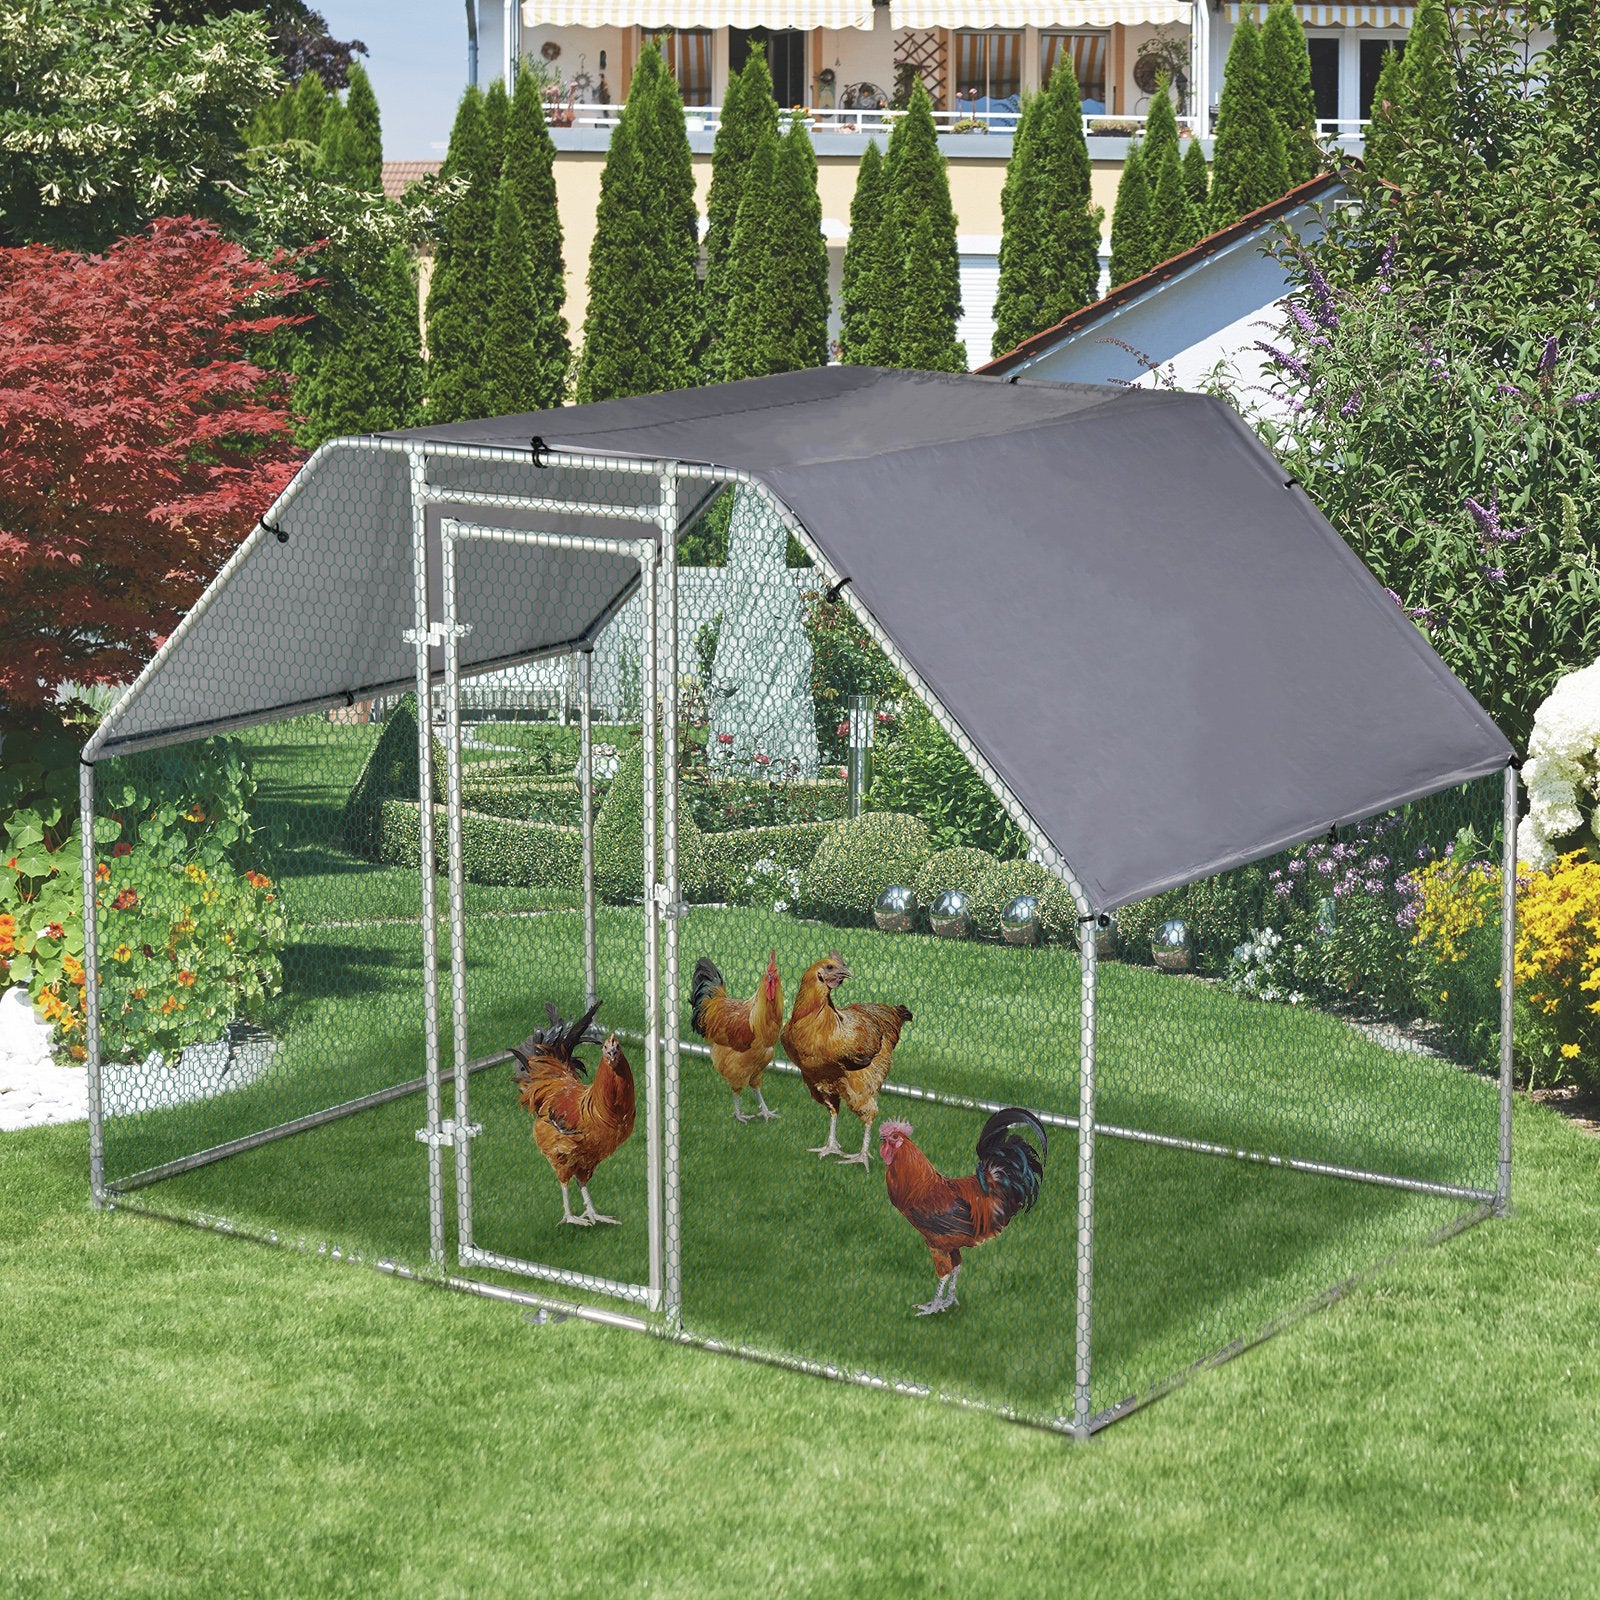 PawHut Large Metal Walk-In Chicken Coop Run Cage w/ Cover Outdoor, 280W x 190D x 195H cm